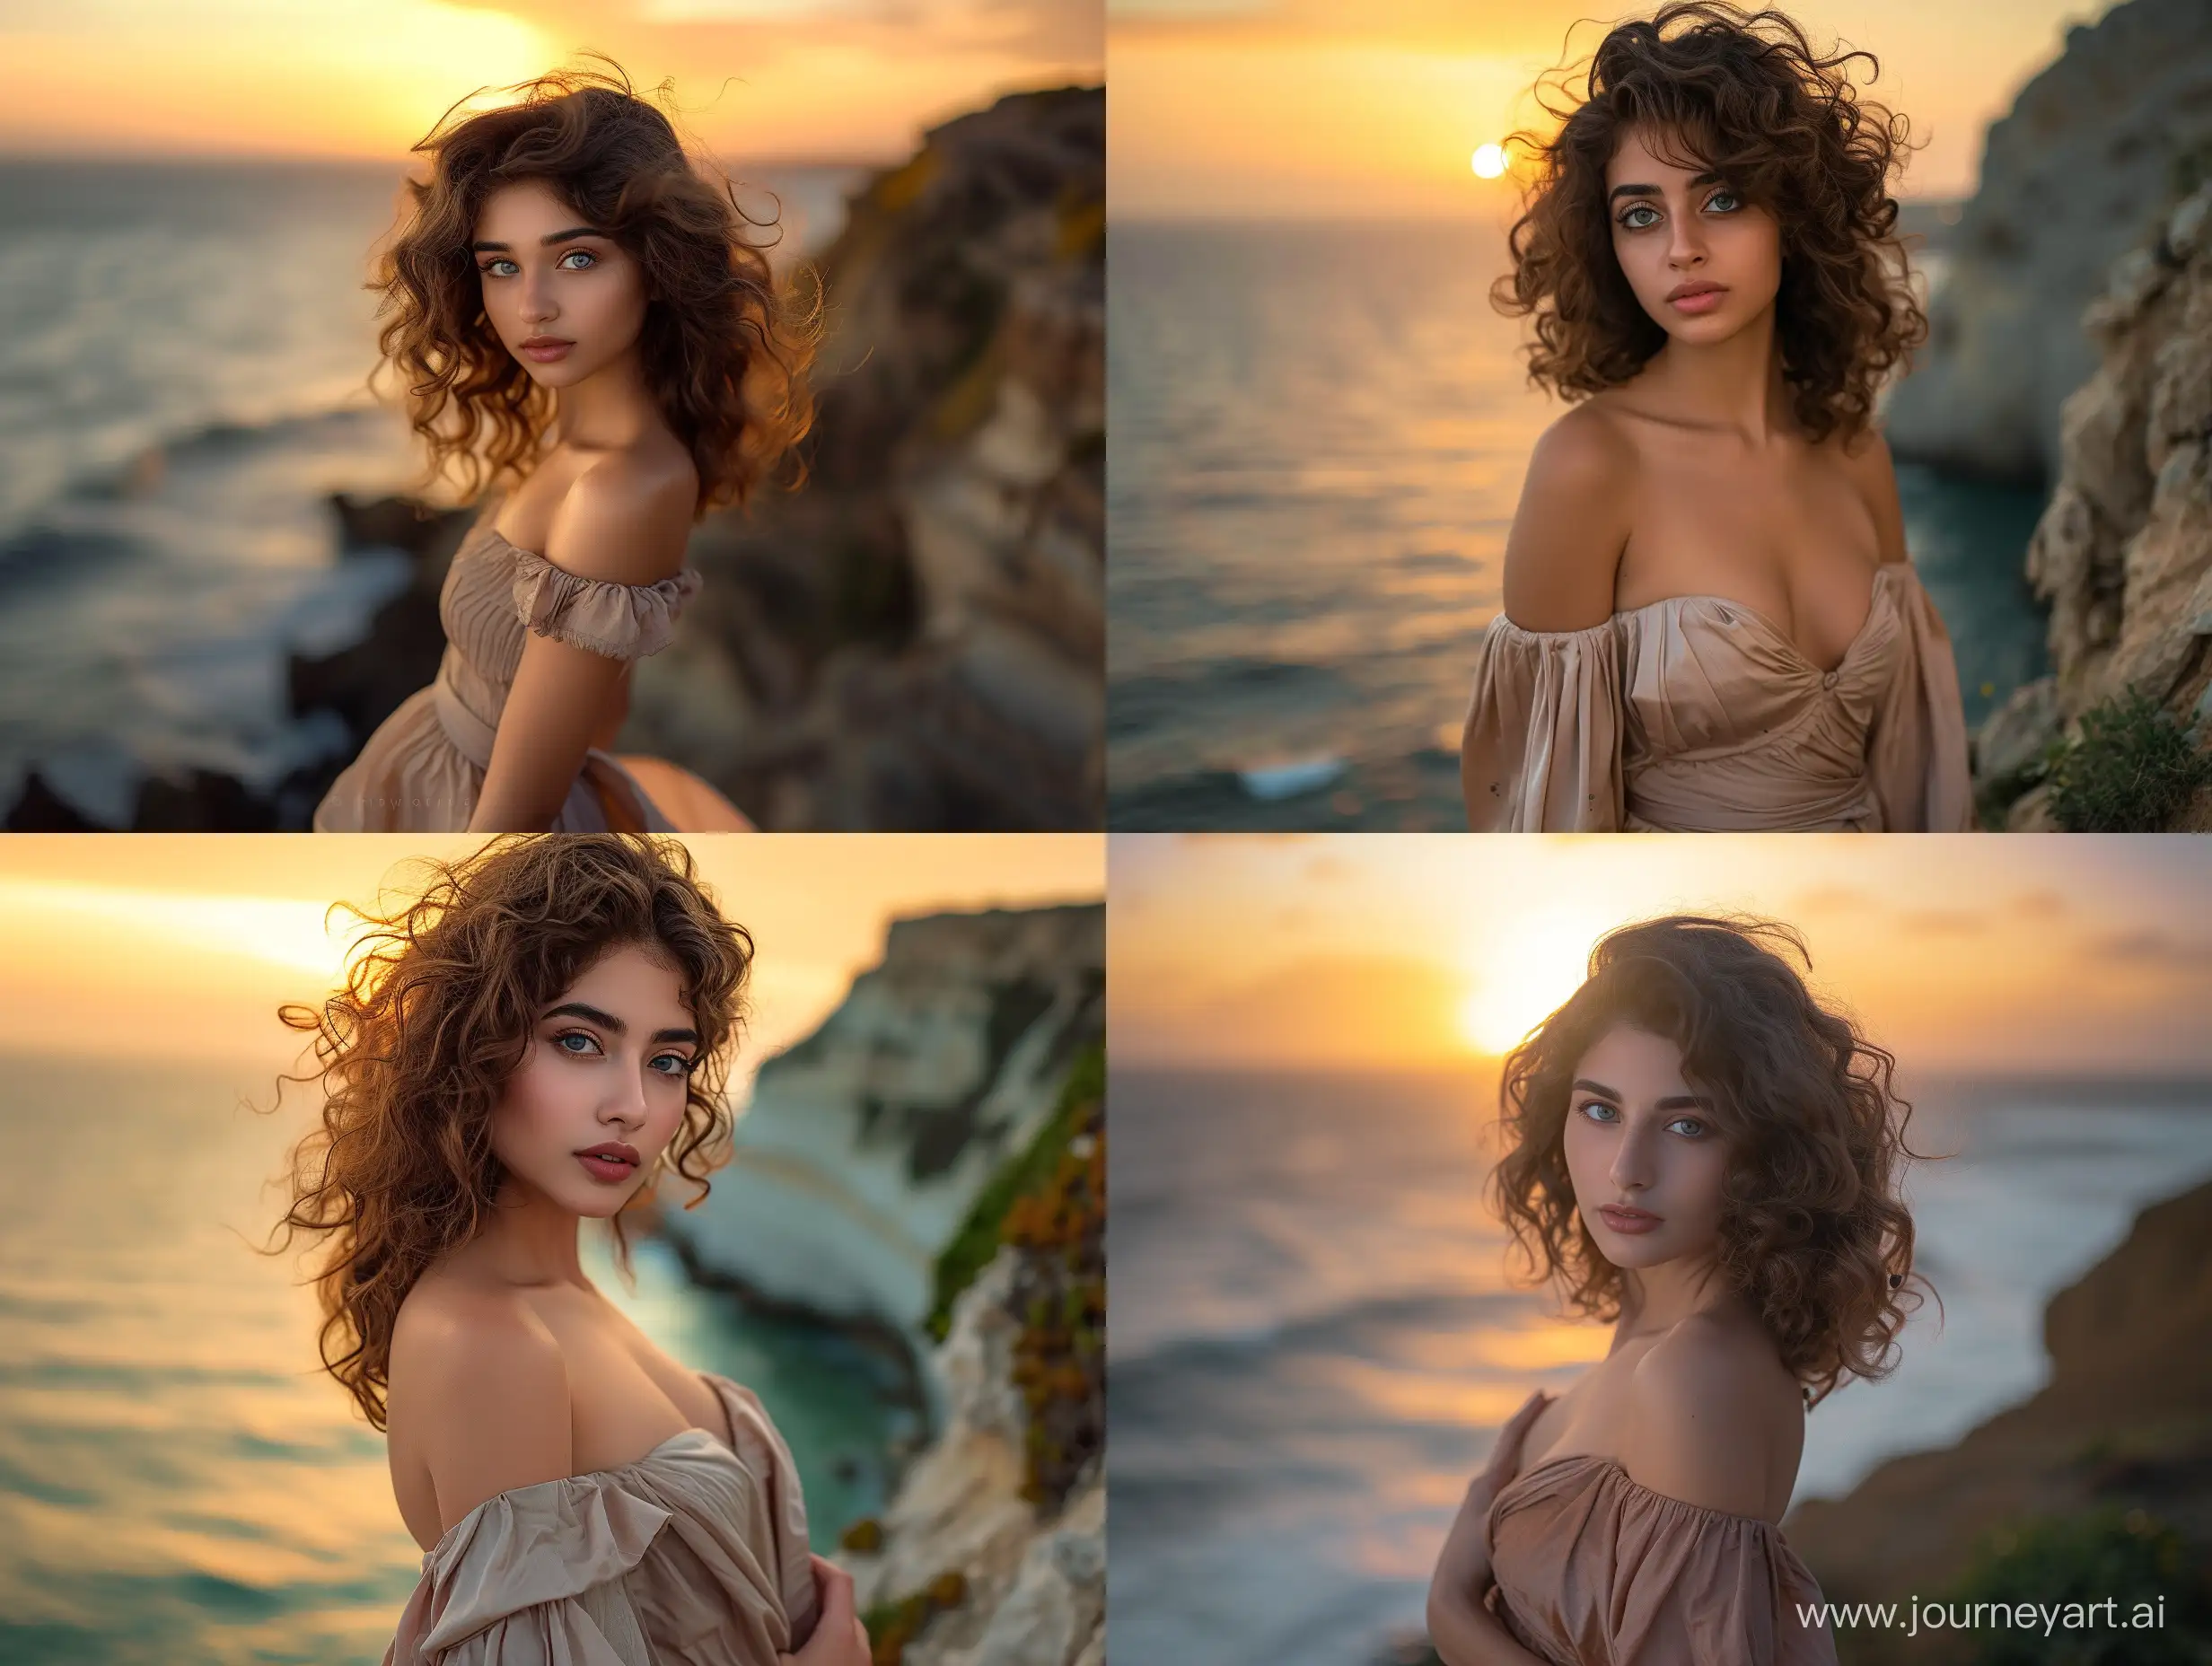 Camera Sony A7R5, Sigma 85mm f/1.2, A 20-year-old Egyptian girl with brown curly hair, grey eyes, a symmetrical attractive face, and a curvy body, wearing a billowing dress, is standing on a cliff overlooking the ocean at sunset. She is posing with a contemplative expression, facing forward.